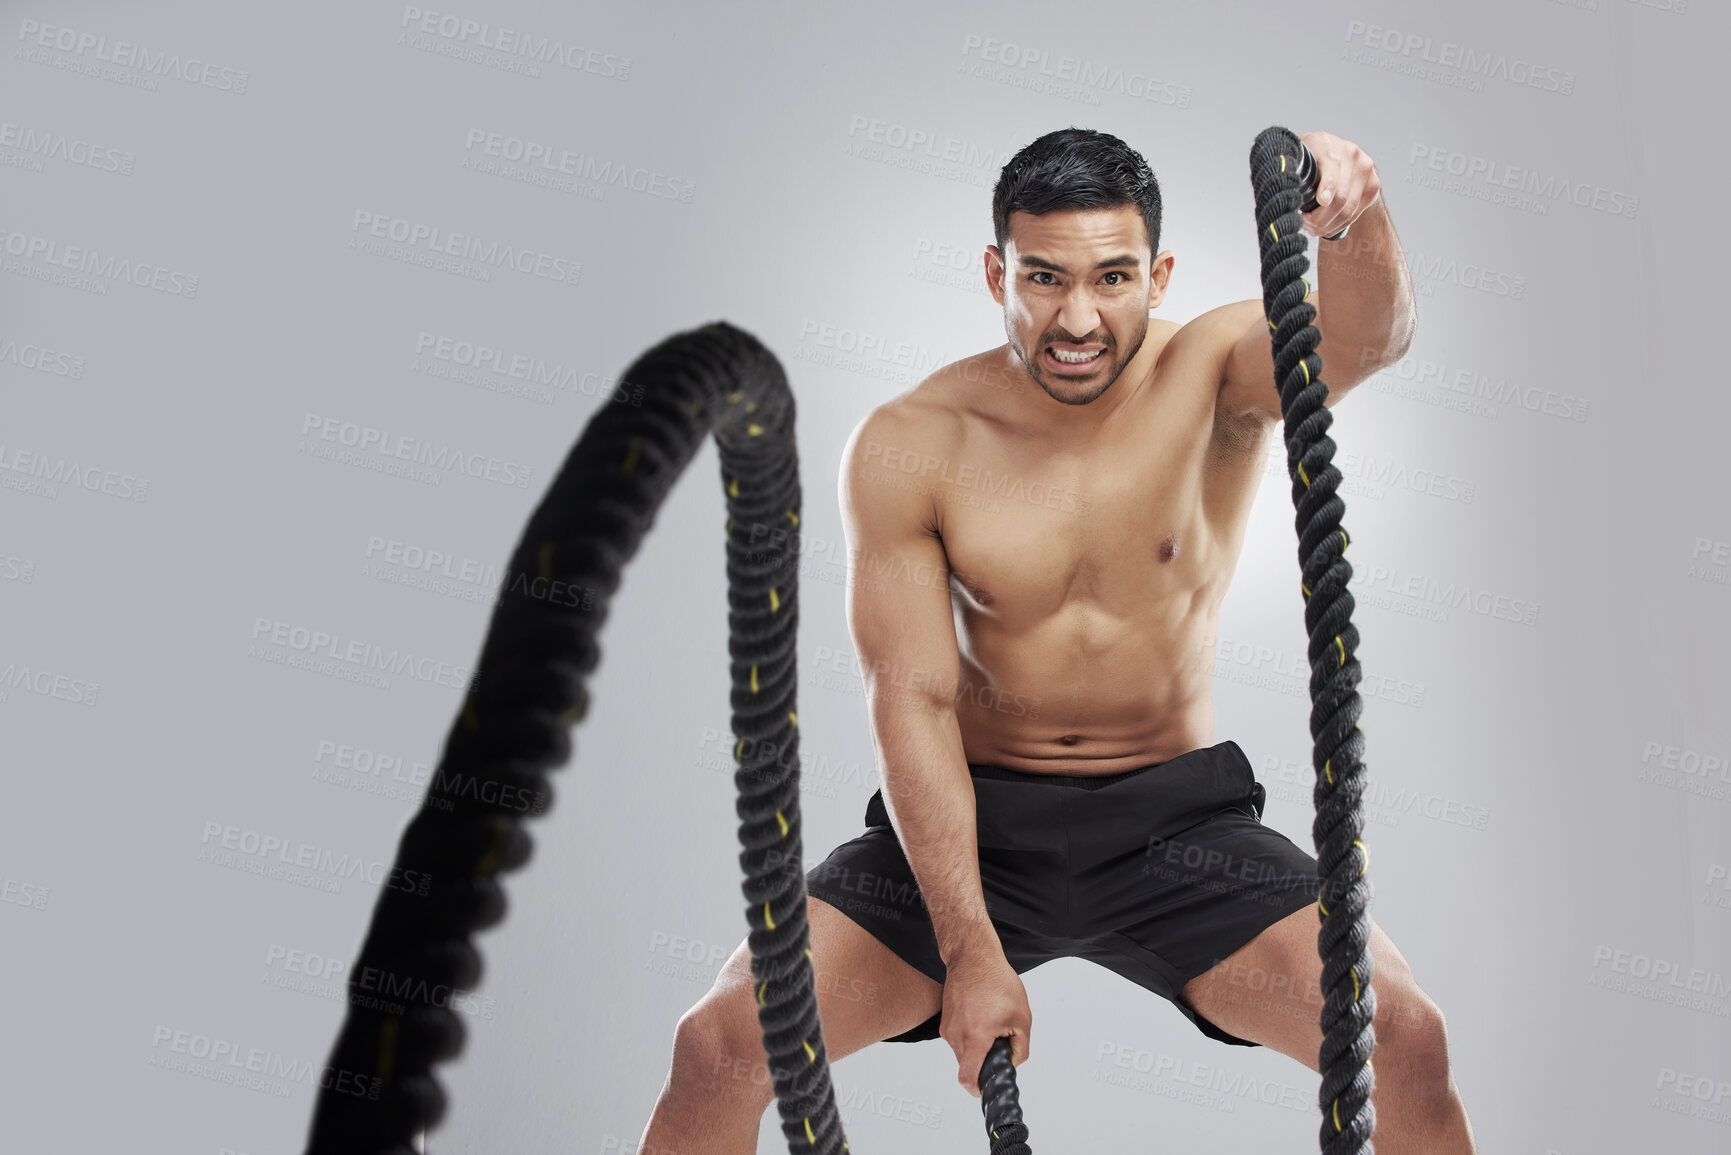 Buy stock photo Studio portrait of a muscular young man exercising with battle ropes against a grey background